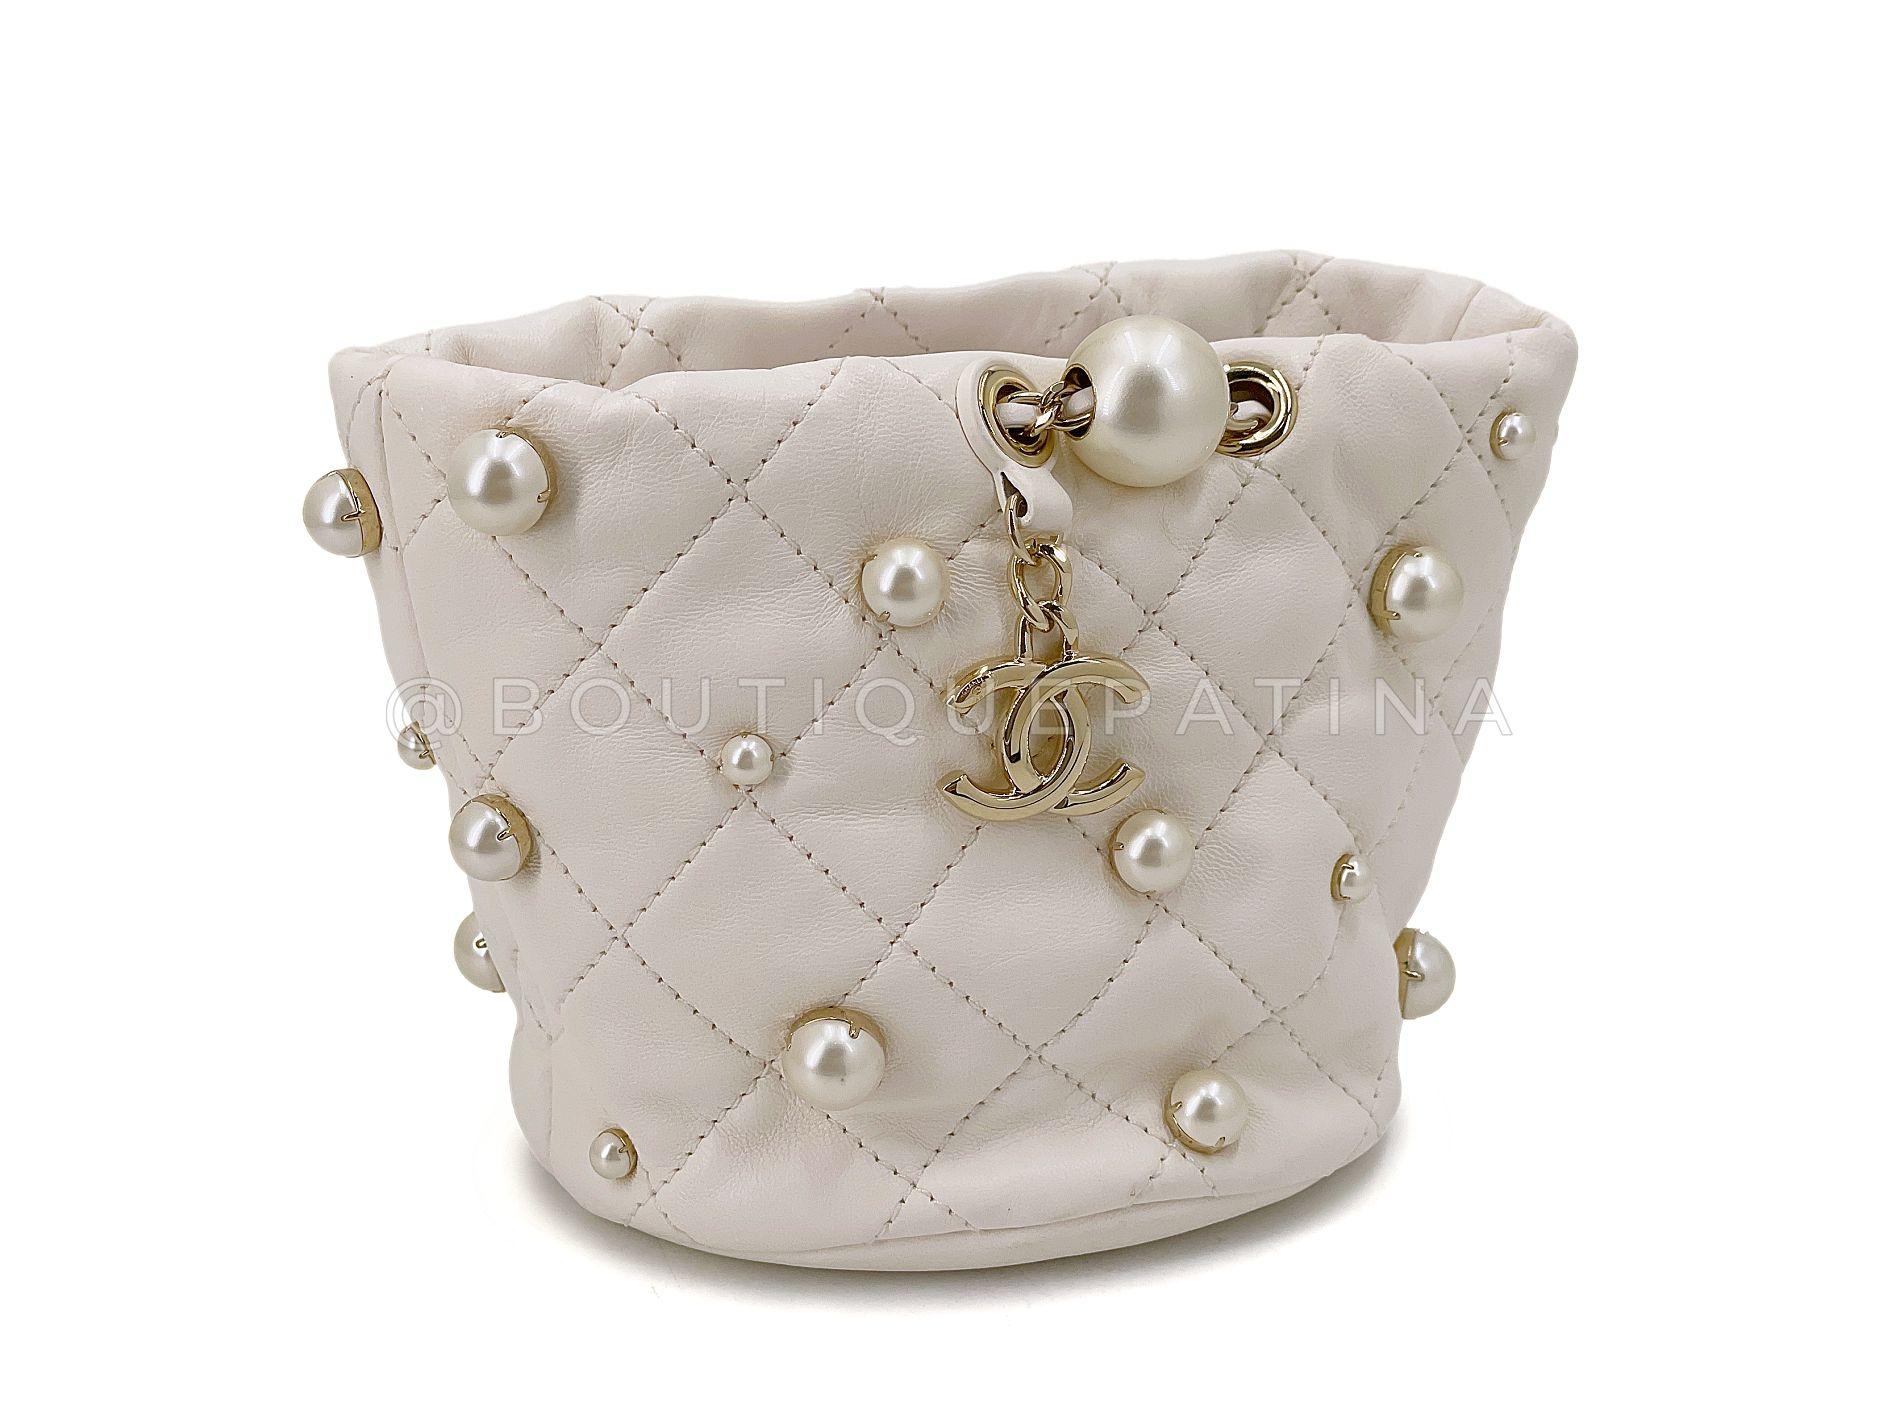 Chanel 21S White Cream About Pearls Bucket Bag Mini  67973 In Excellent Condition For Sale In Costa Mesa, CA